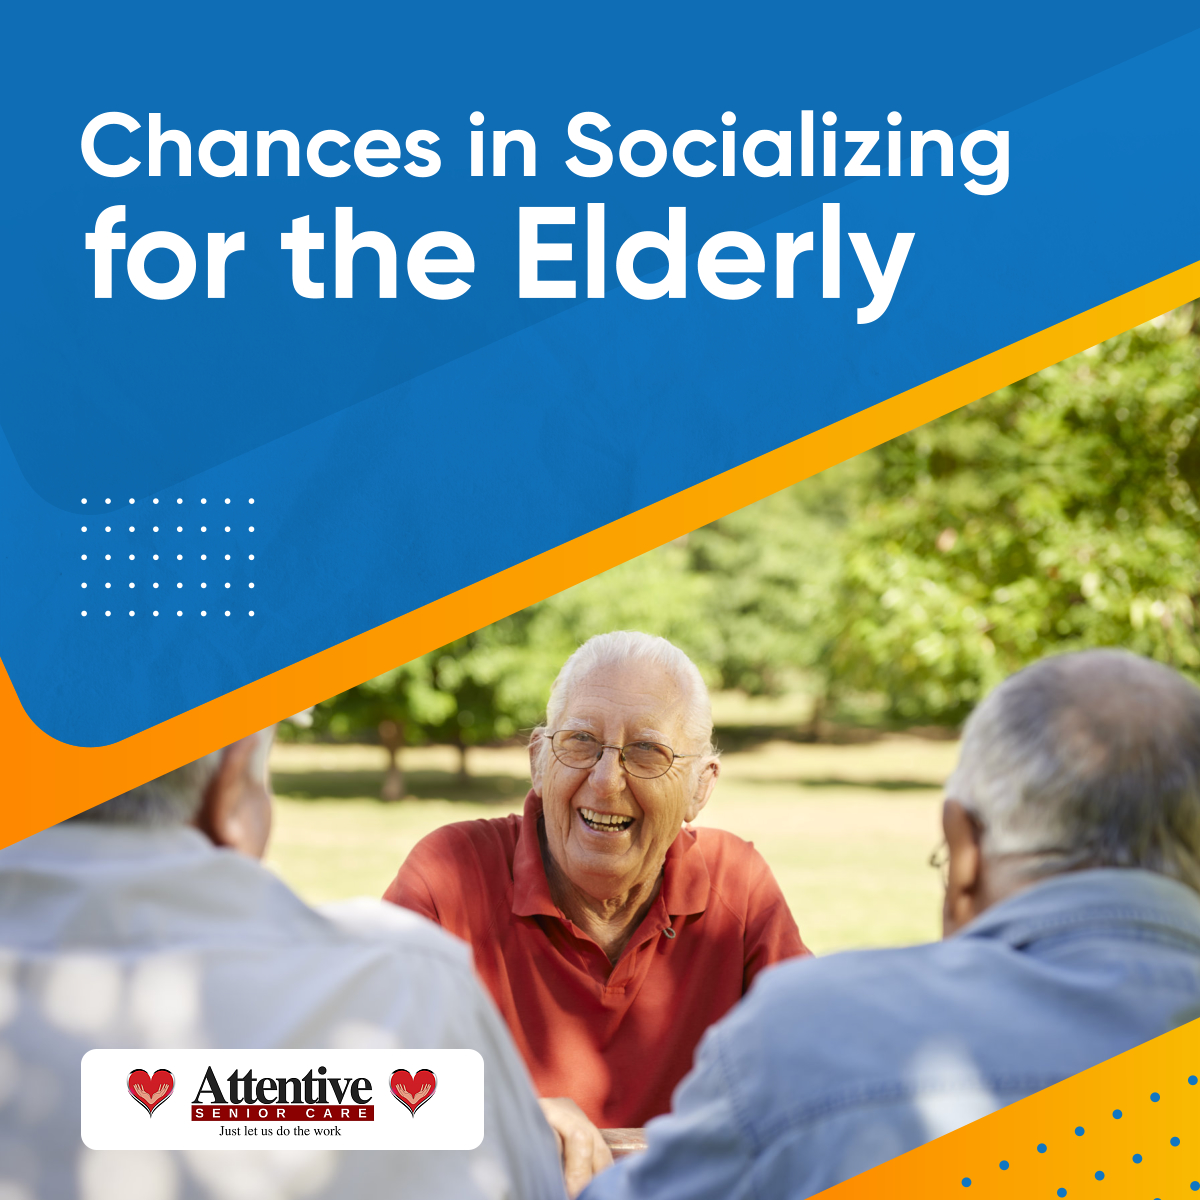 For the seniors, it's essential for them to make the most of opportunities to meet new people and build relationships. Read more: facebook.com/permalink.php?… #Socialization #FresnoCA